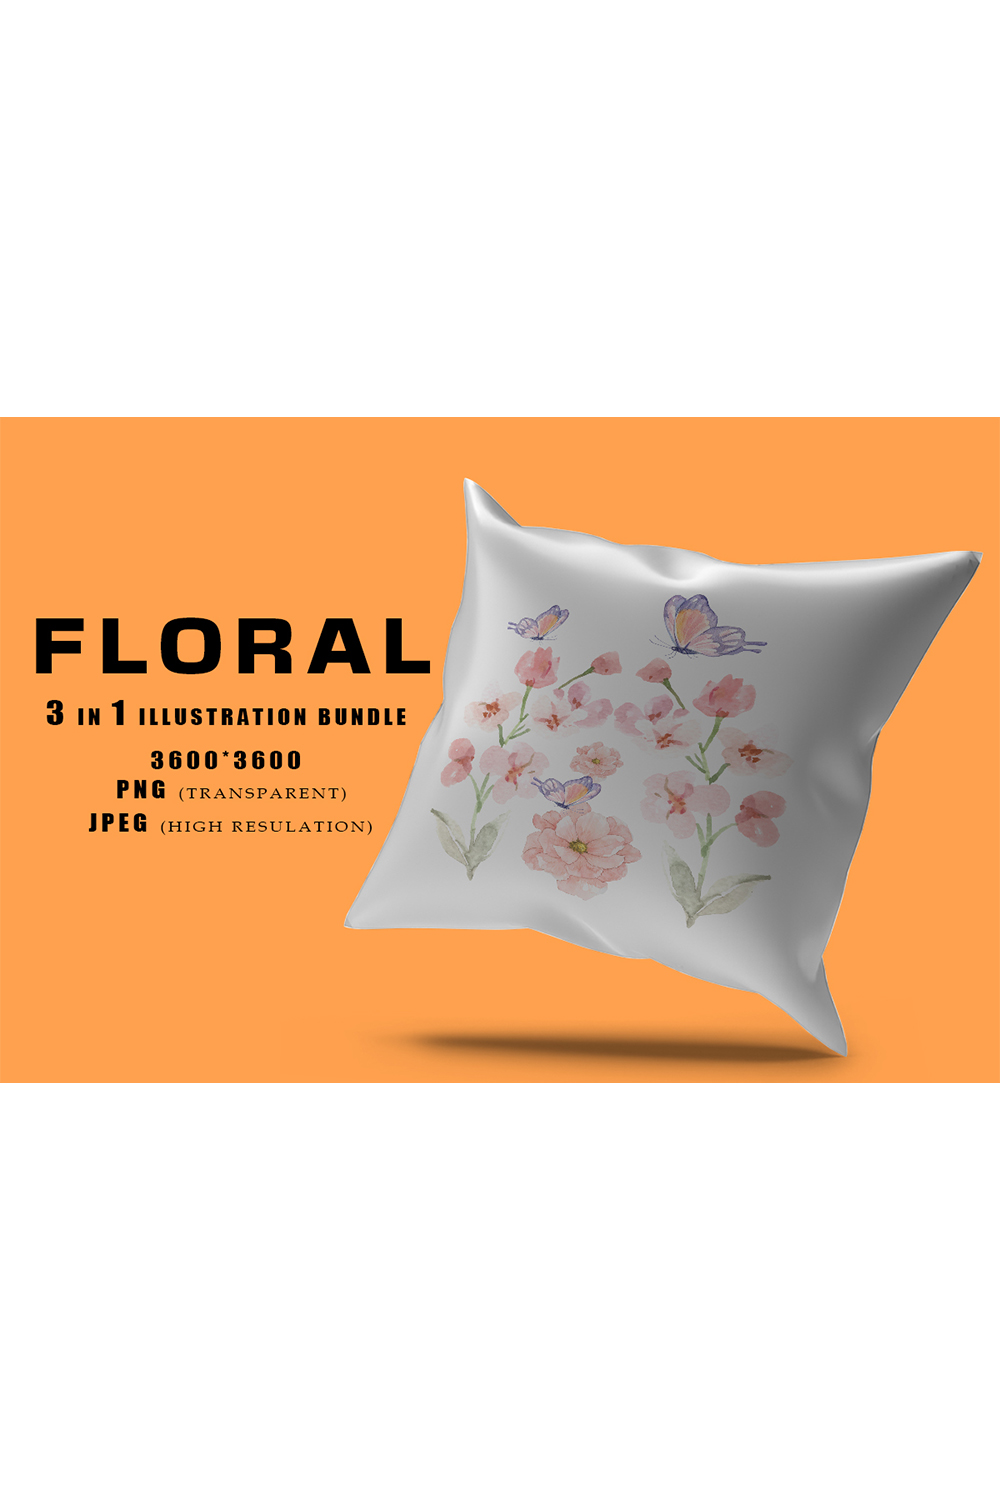 Image of pillow with colorful flowers print